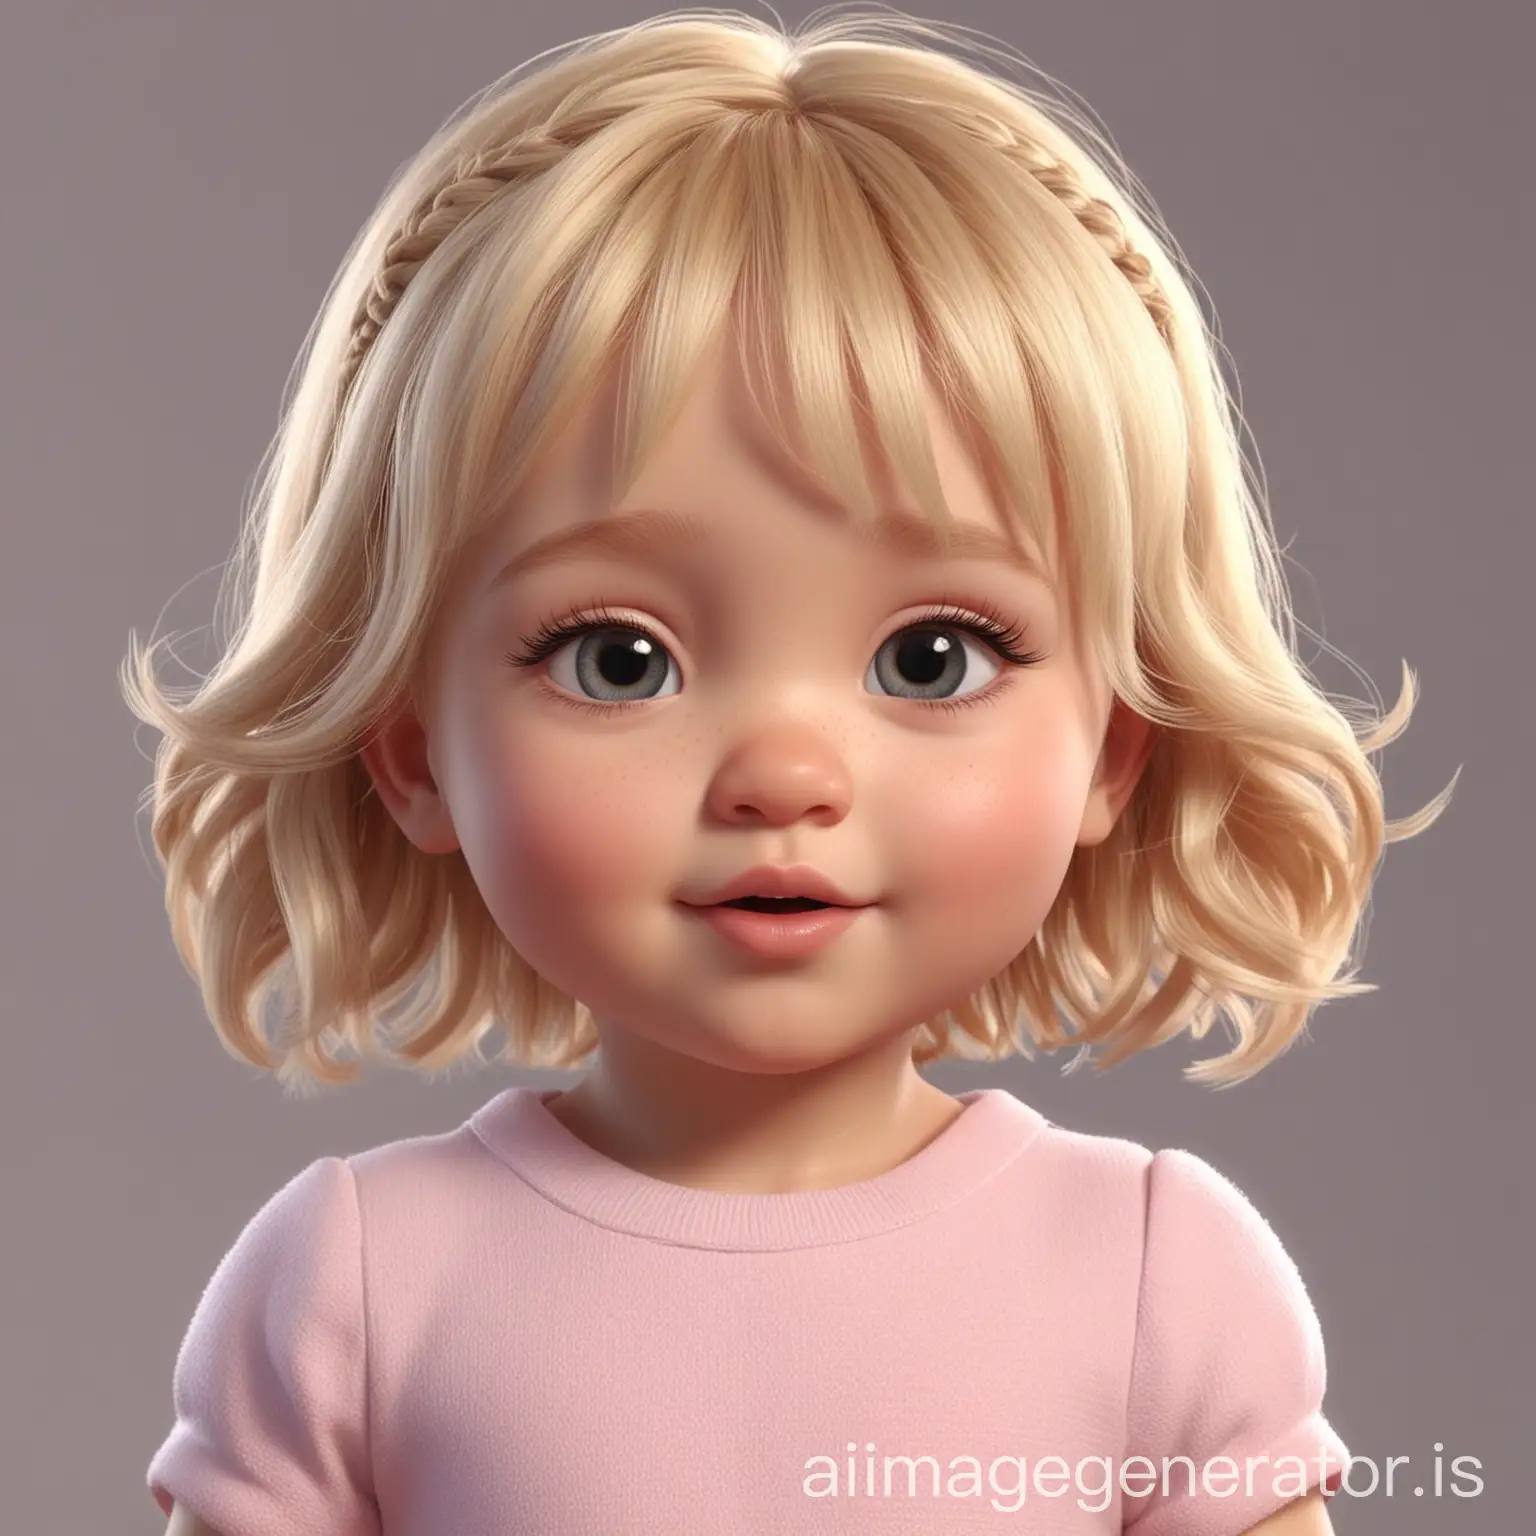 baby girl with blond hair, hairstyle. 3D animation.